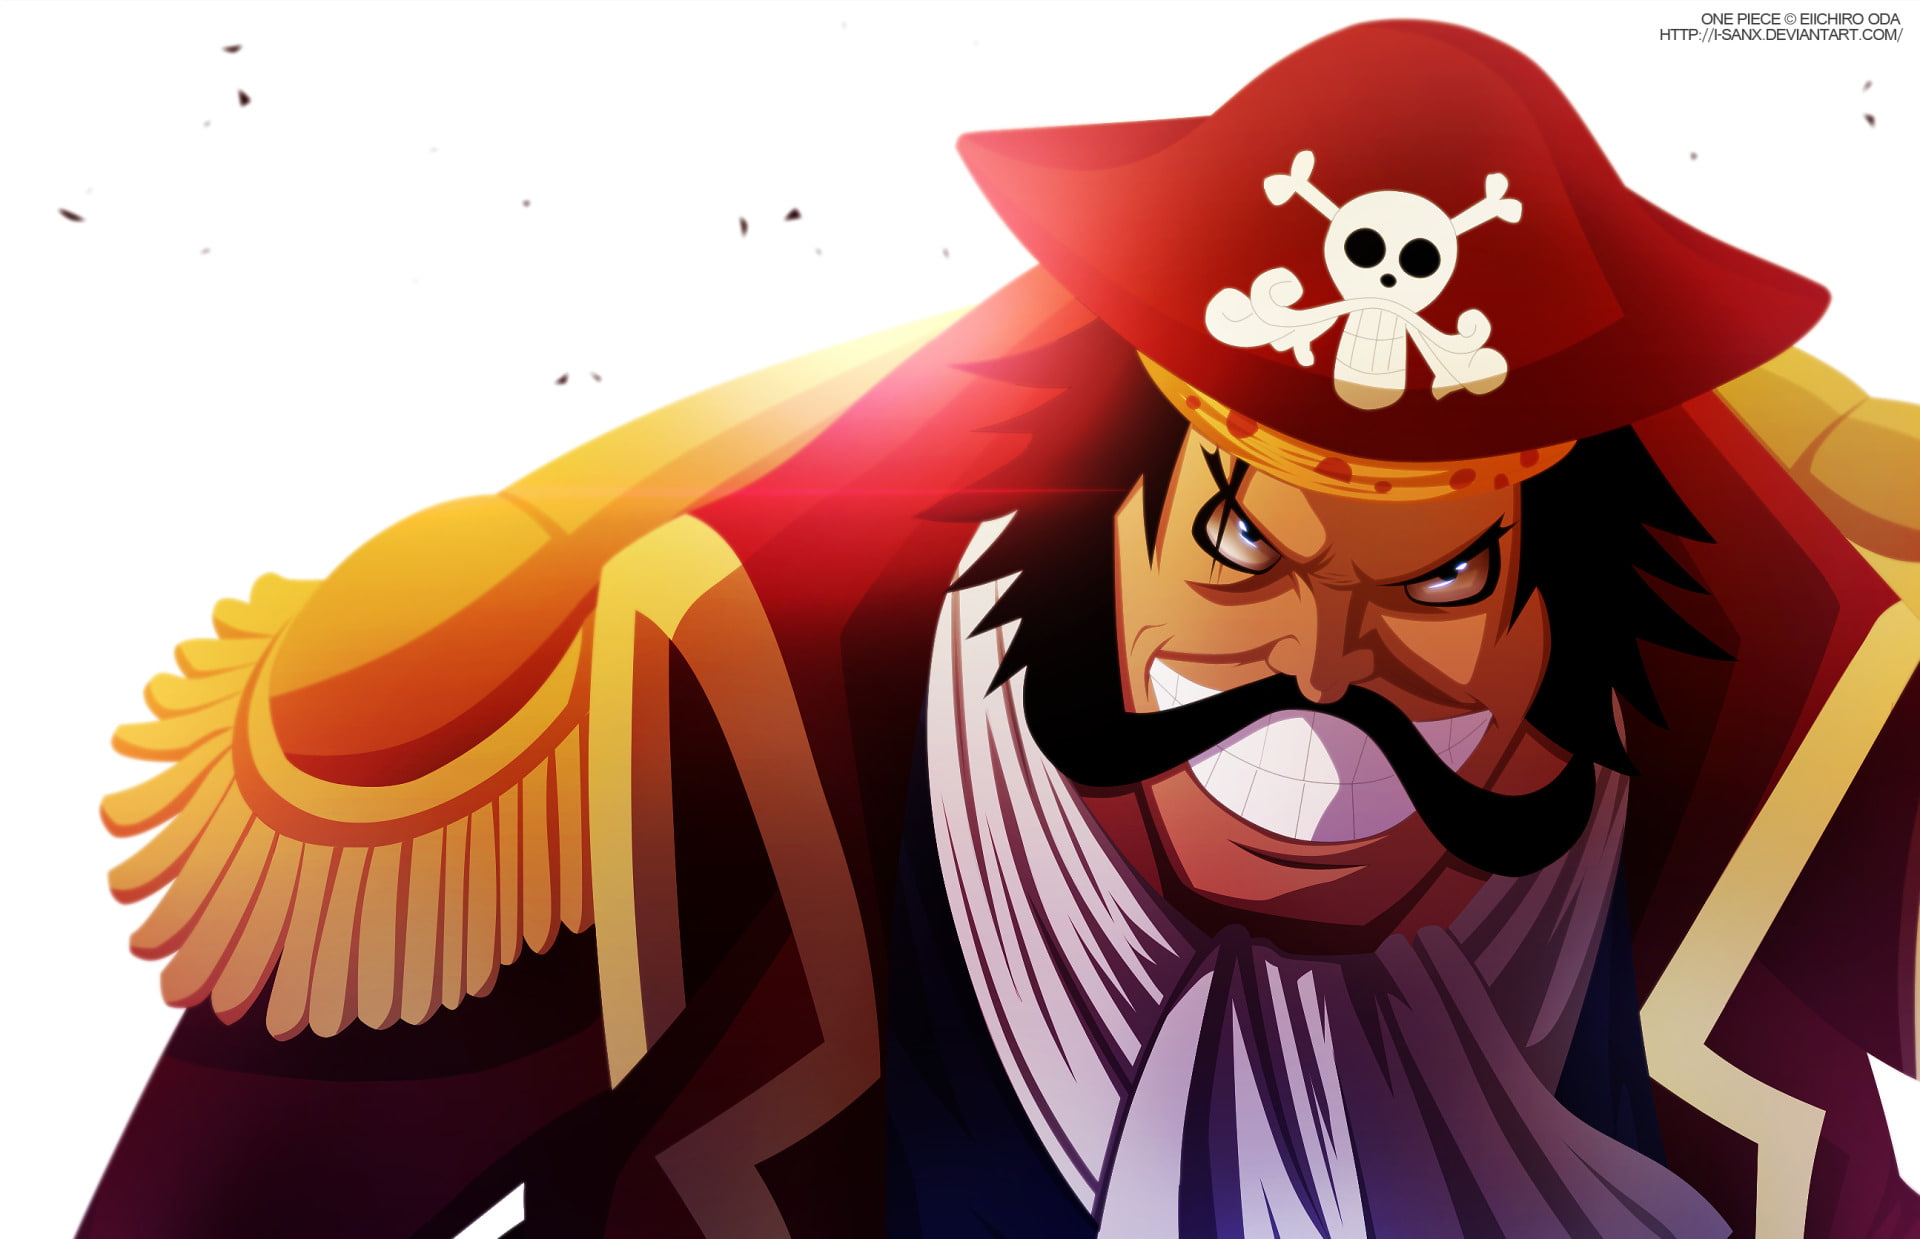 One Piece Chapter 969 Read Online, Release Date, Plot Spoilers and Present Timeline Story